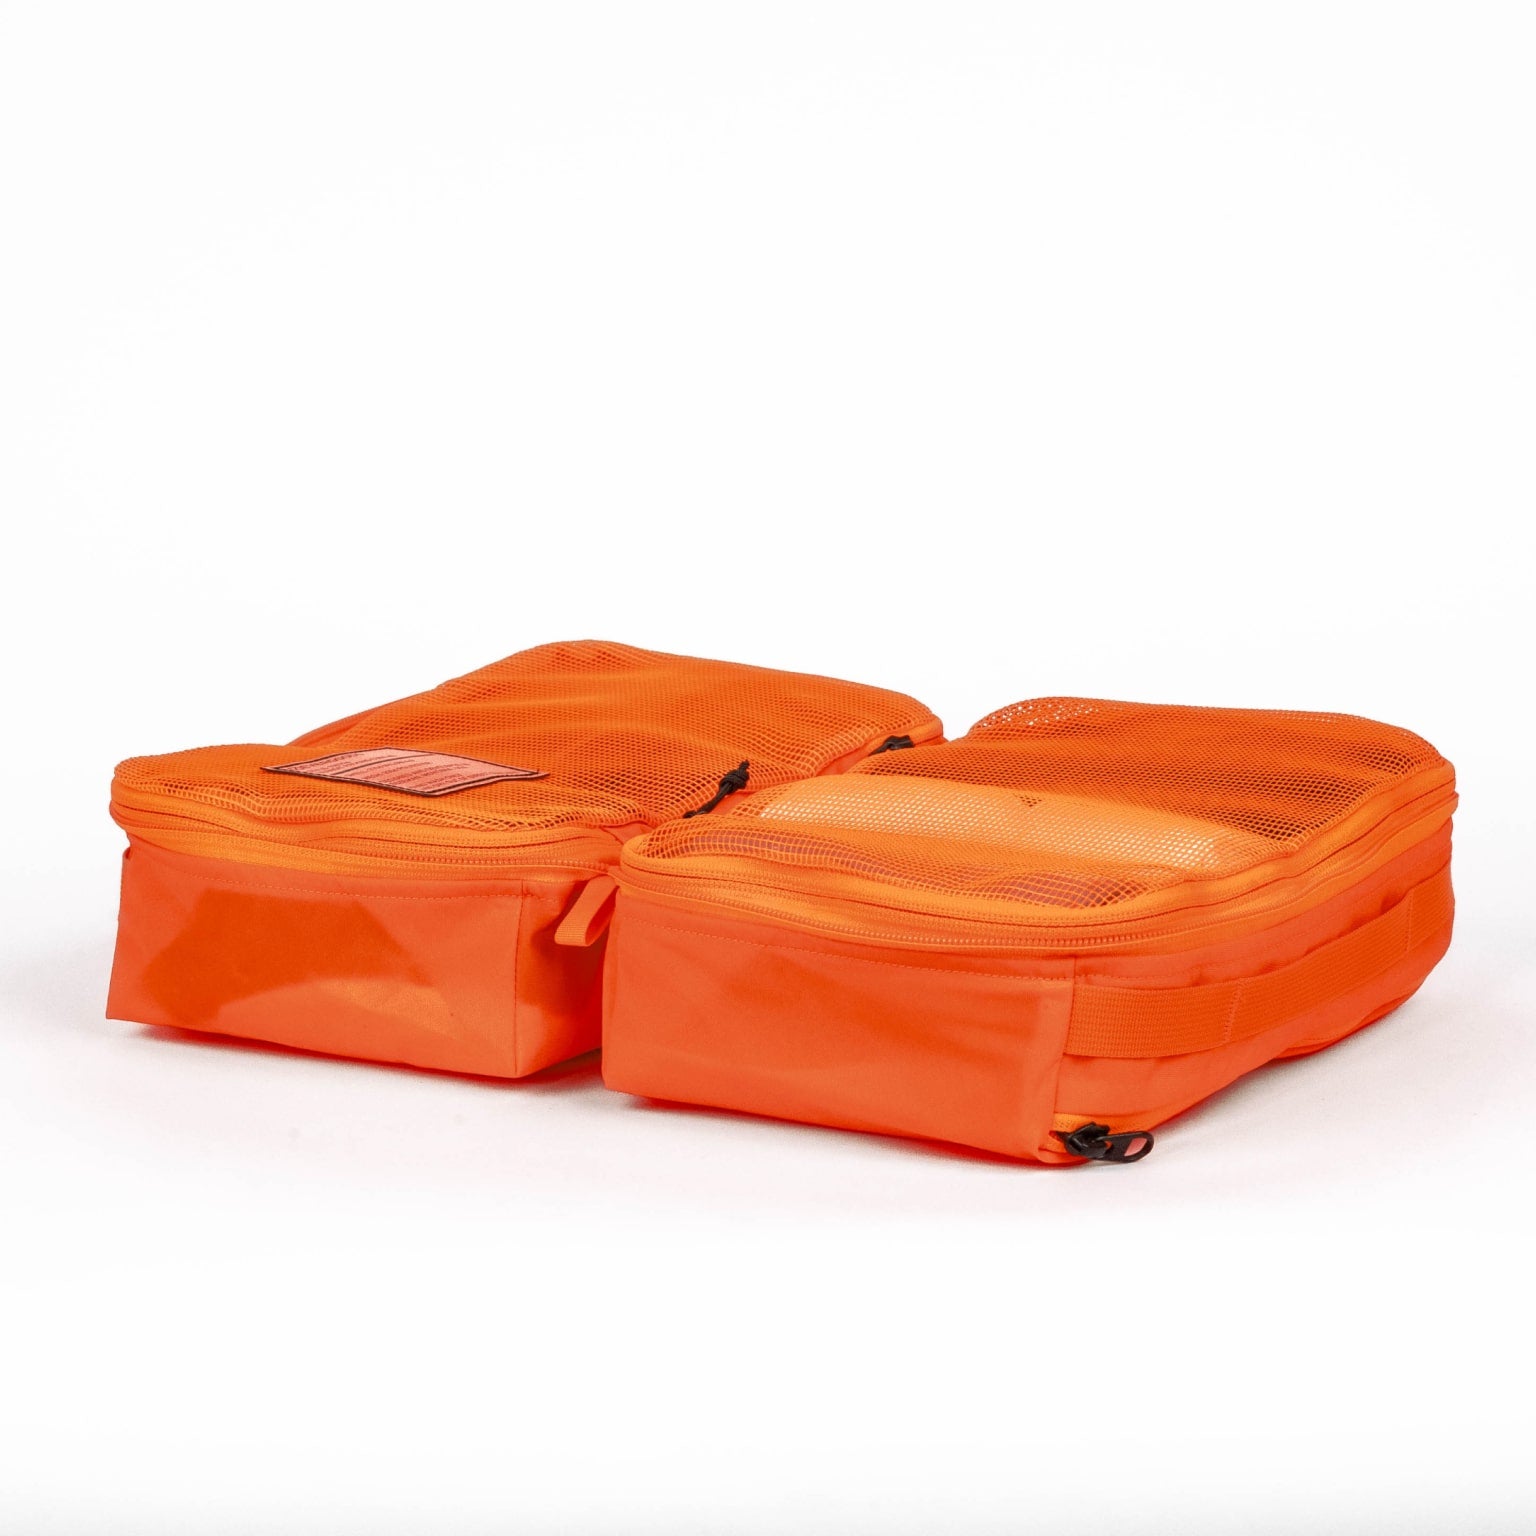 Compression Packing Cubes with Shoe Bag - Hot Orange, 4 Pack